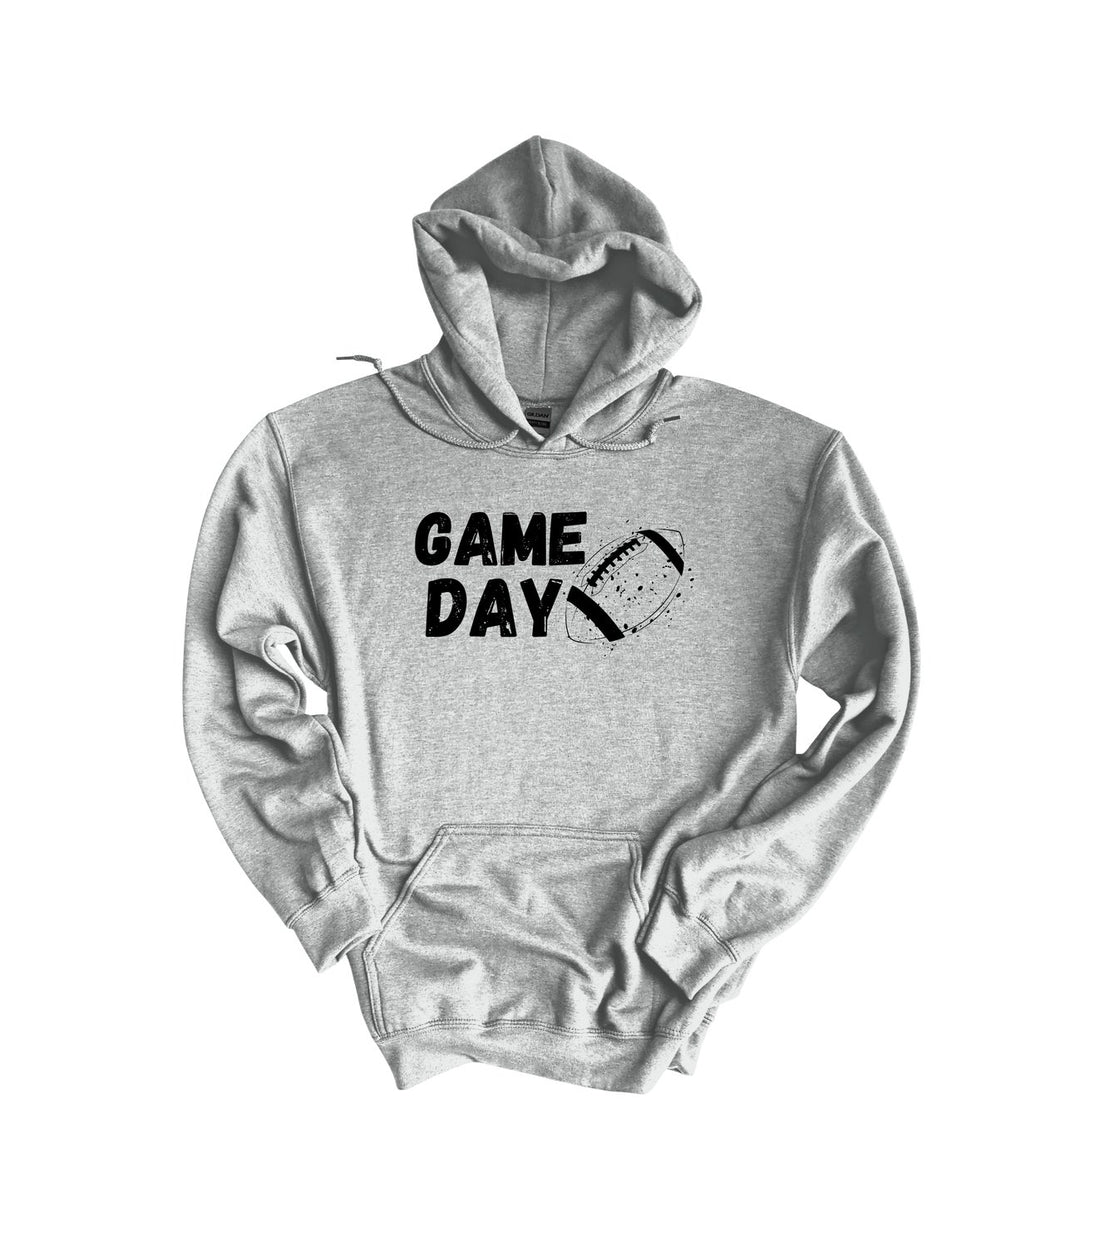 Game Day Hoodies - Positively Sassy